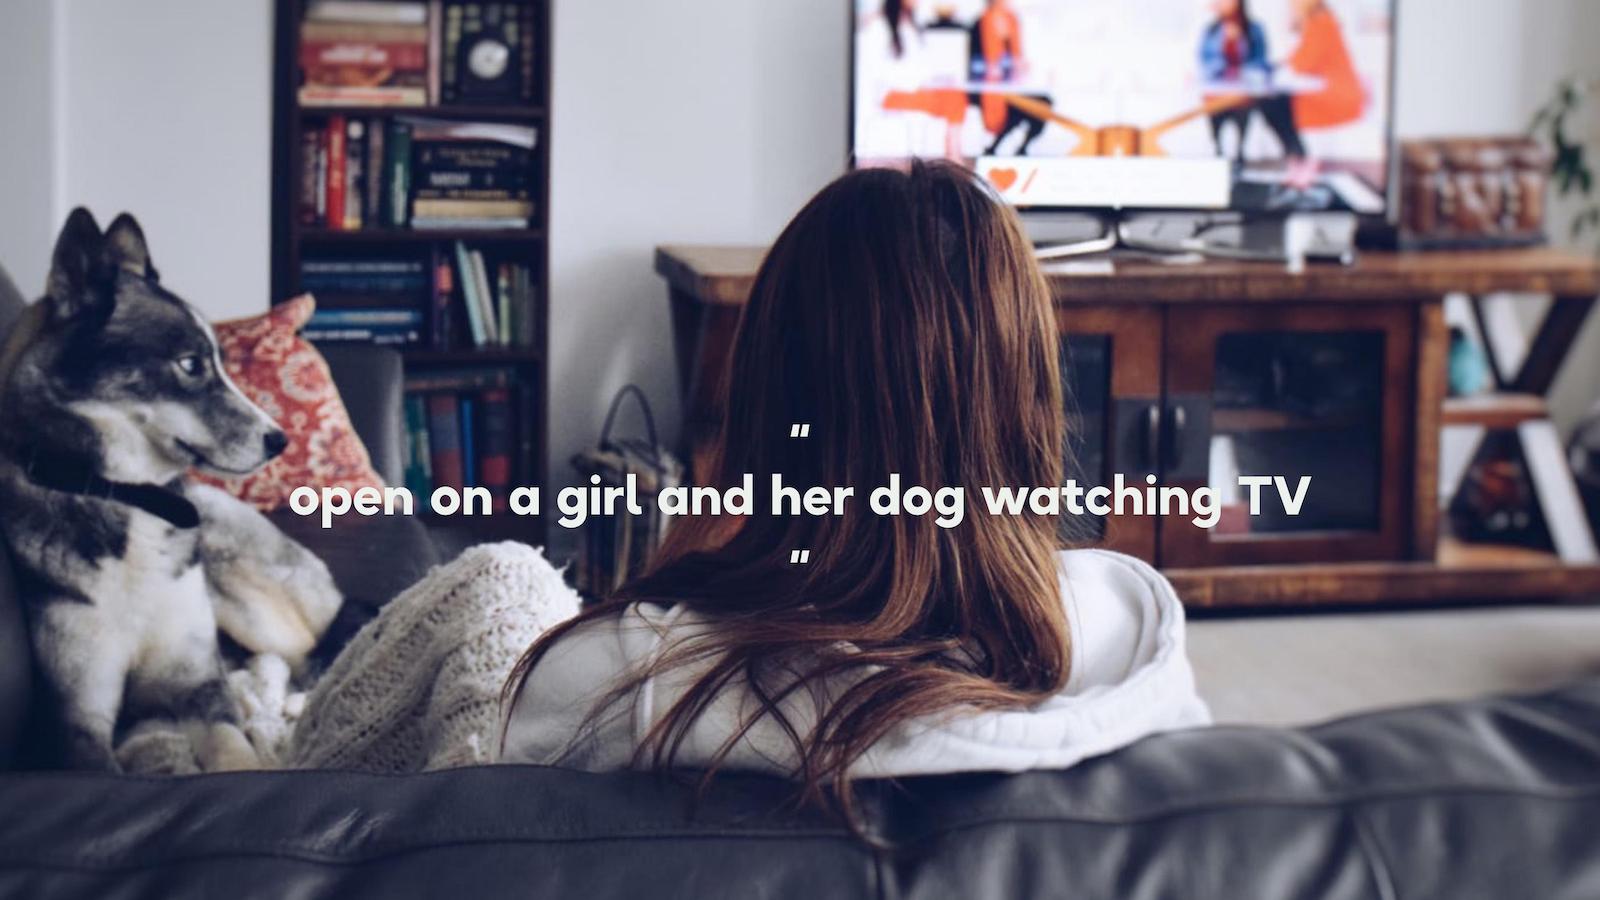 Open on a girl and her dog watching TV (Example 2)